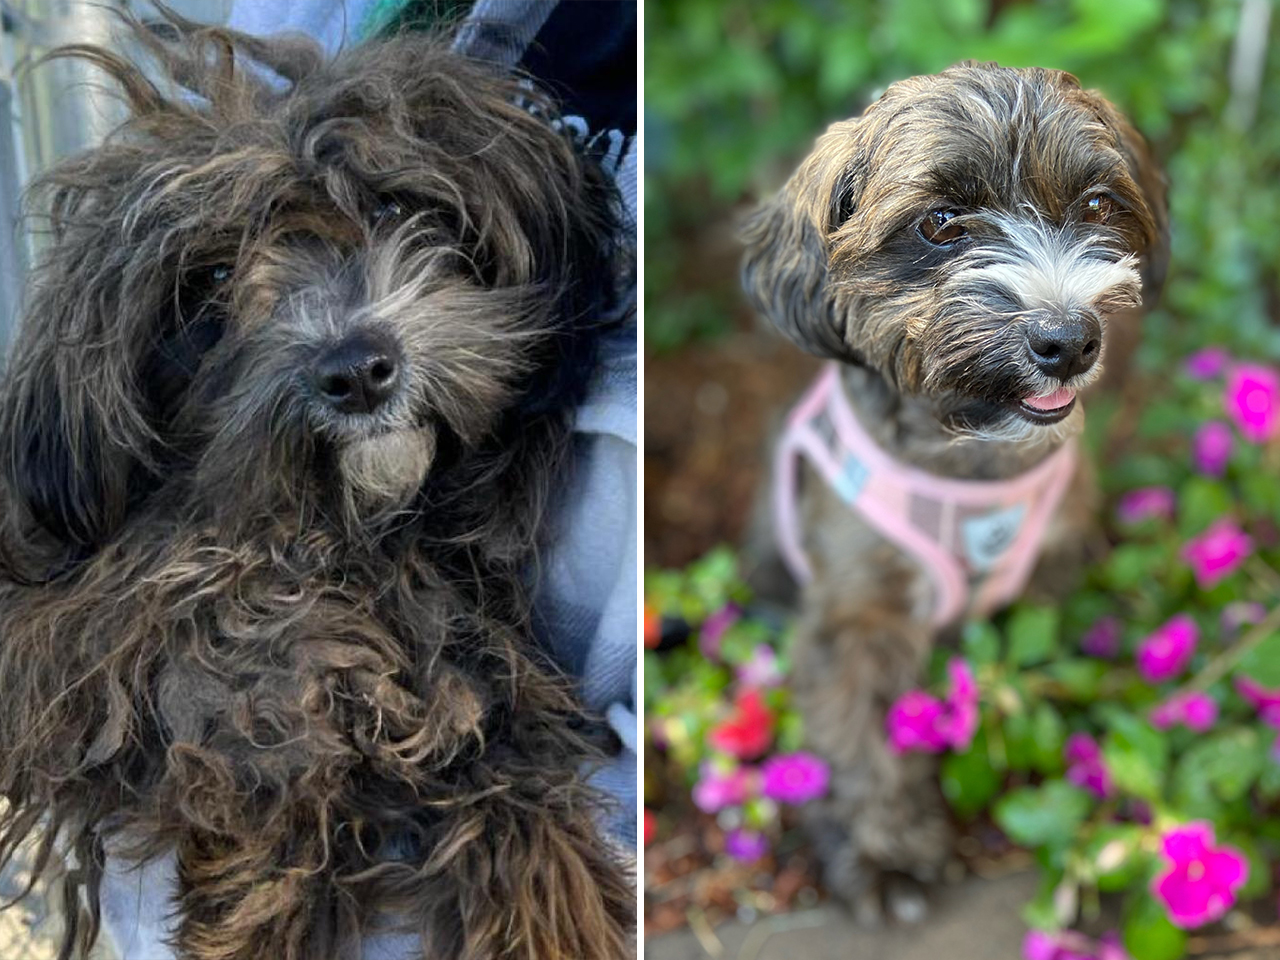 Gracie was a stray, and she was very nervous about being groomed for the first time. It took three visits, but it was worth the wait. A playful pup was revealed, and she was soon adopted.